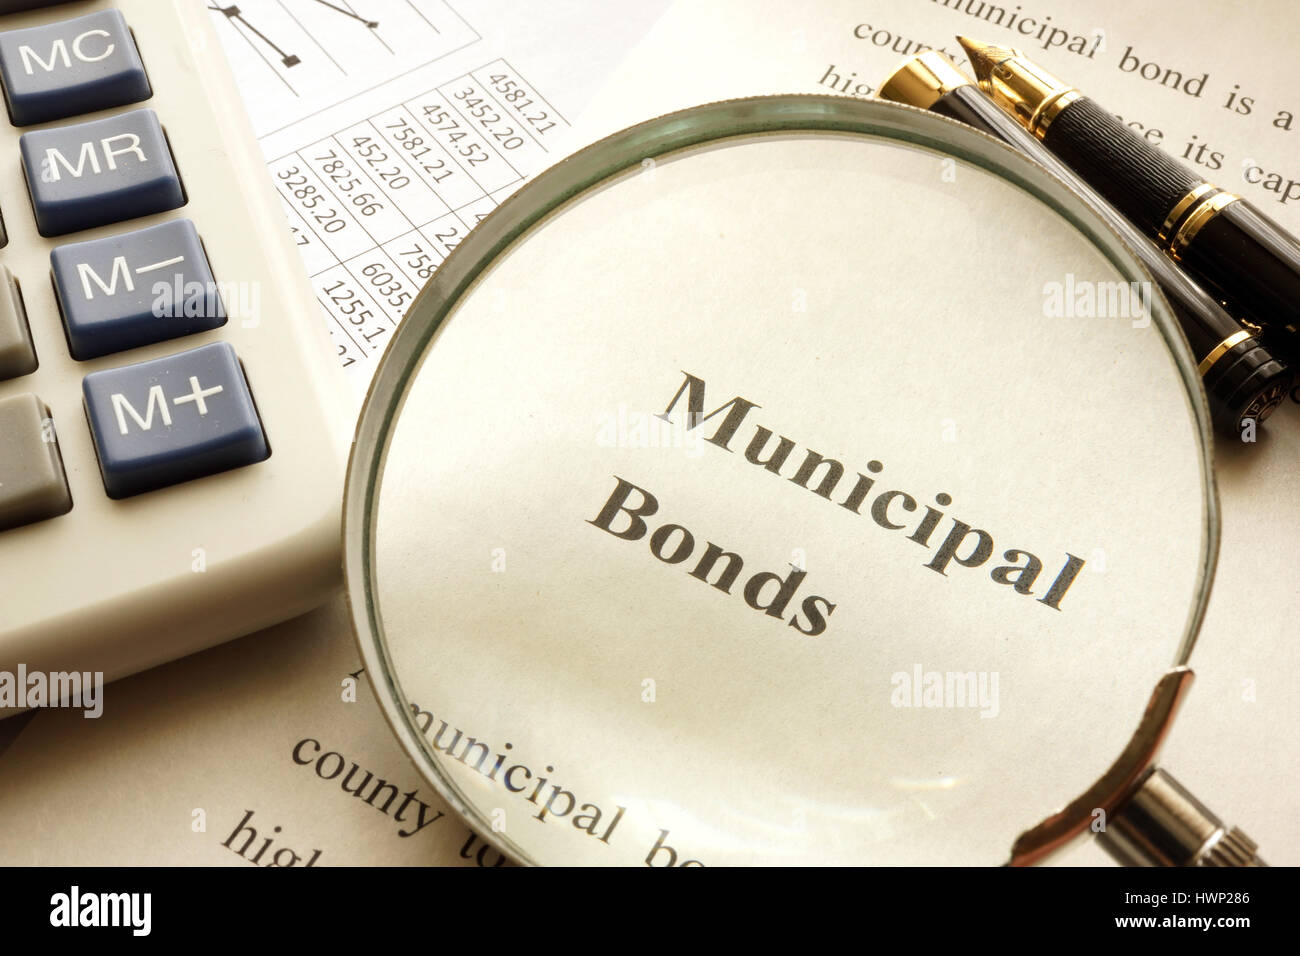 Document with title municipal bond on a table. Stock Photo